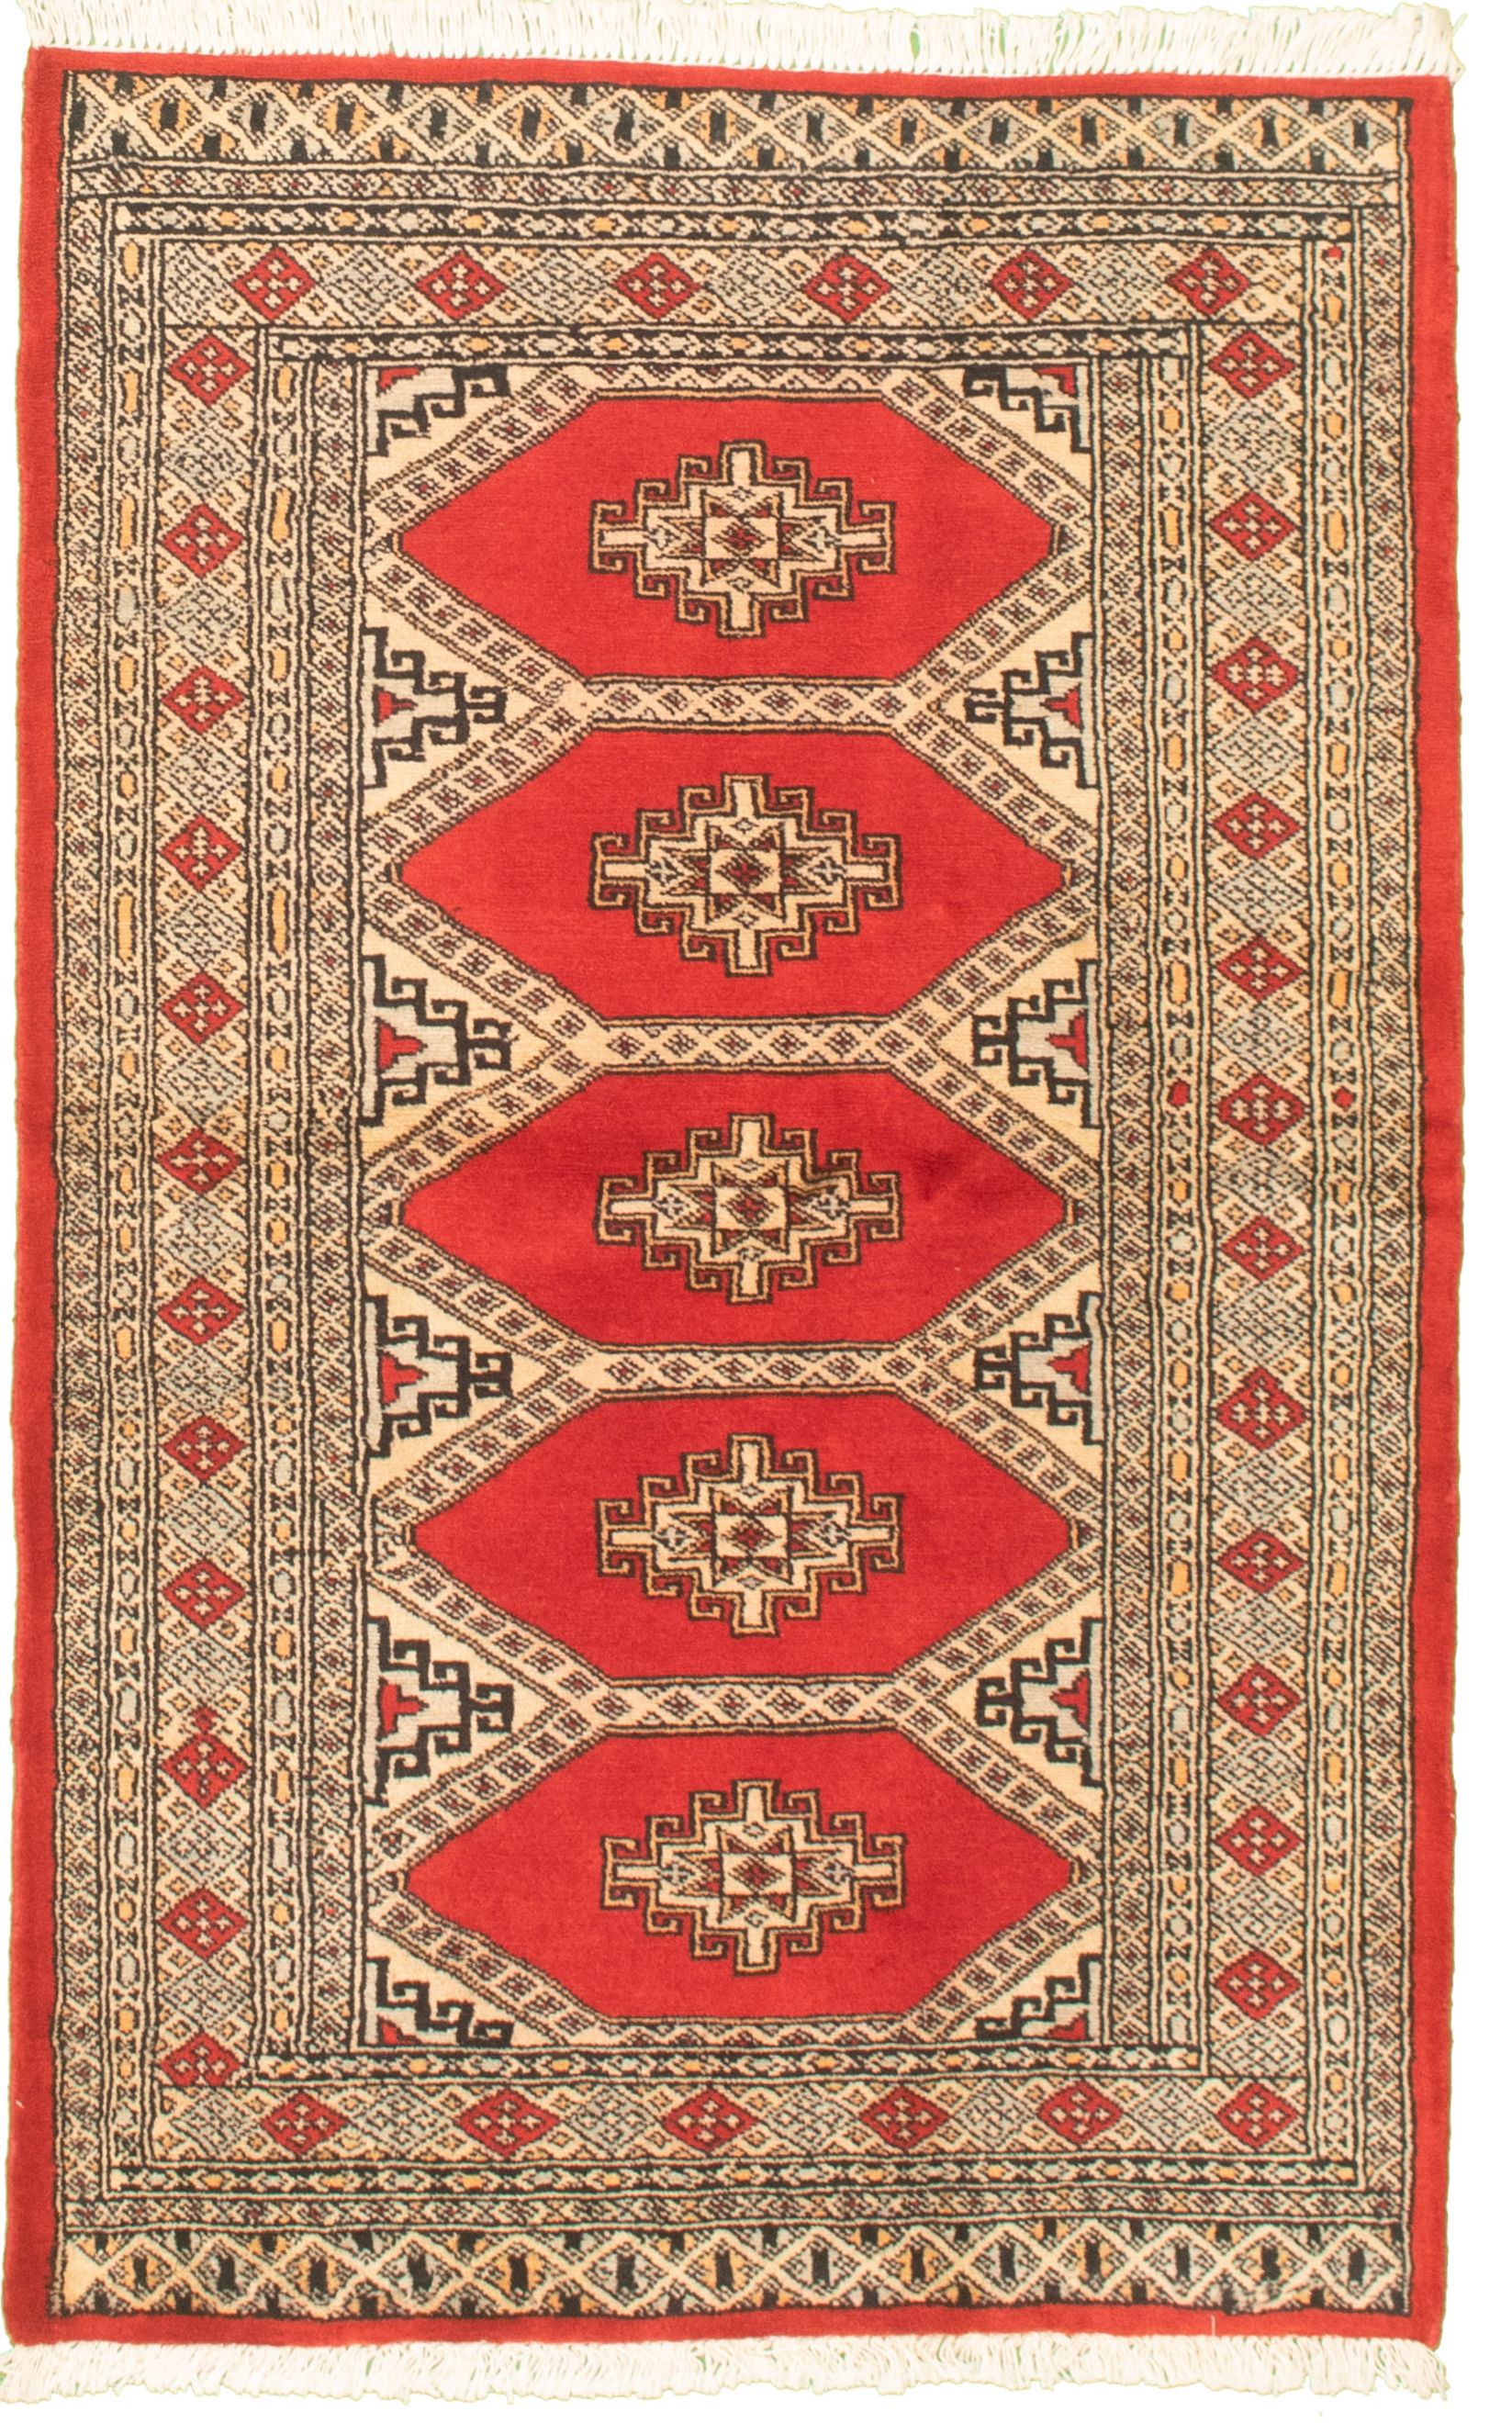 Hand-knotted Finest Peshawar Bokhara Red Wool Rug 3'1" x 5'2"  Size: 3'1" x 5'2"  